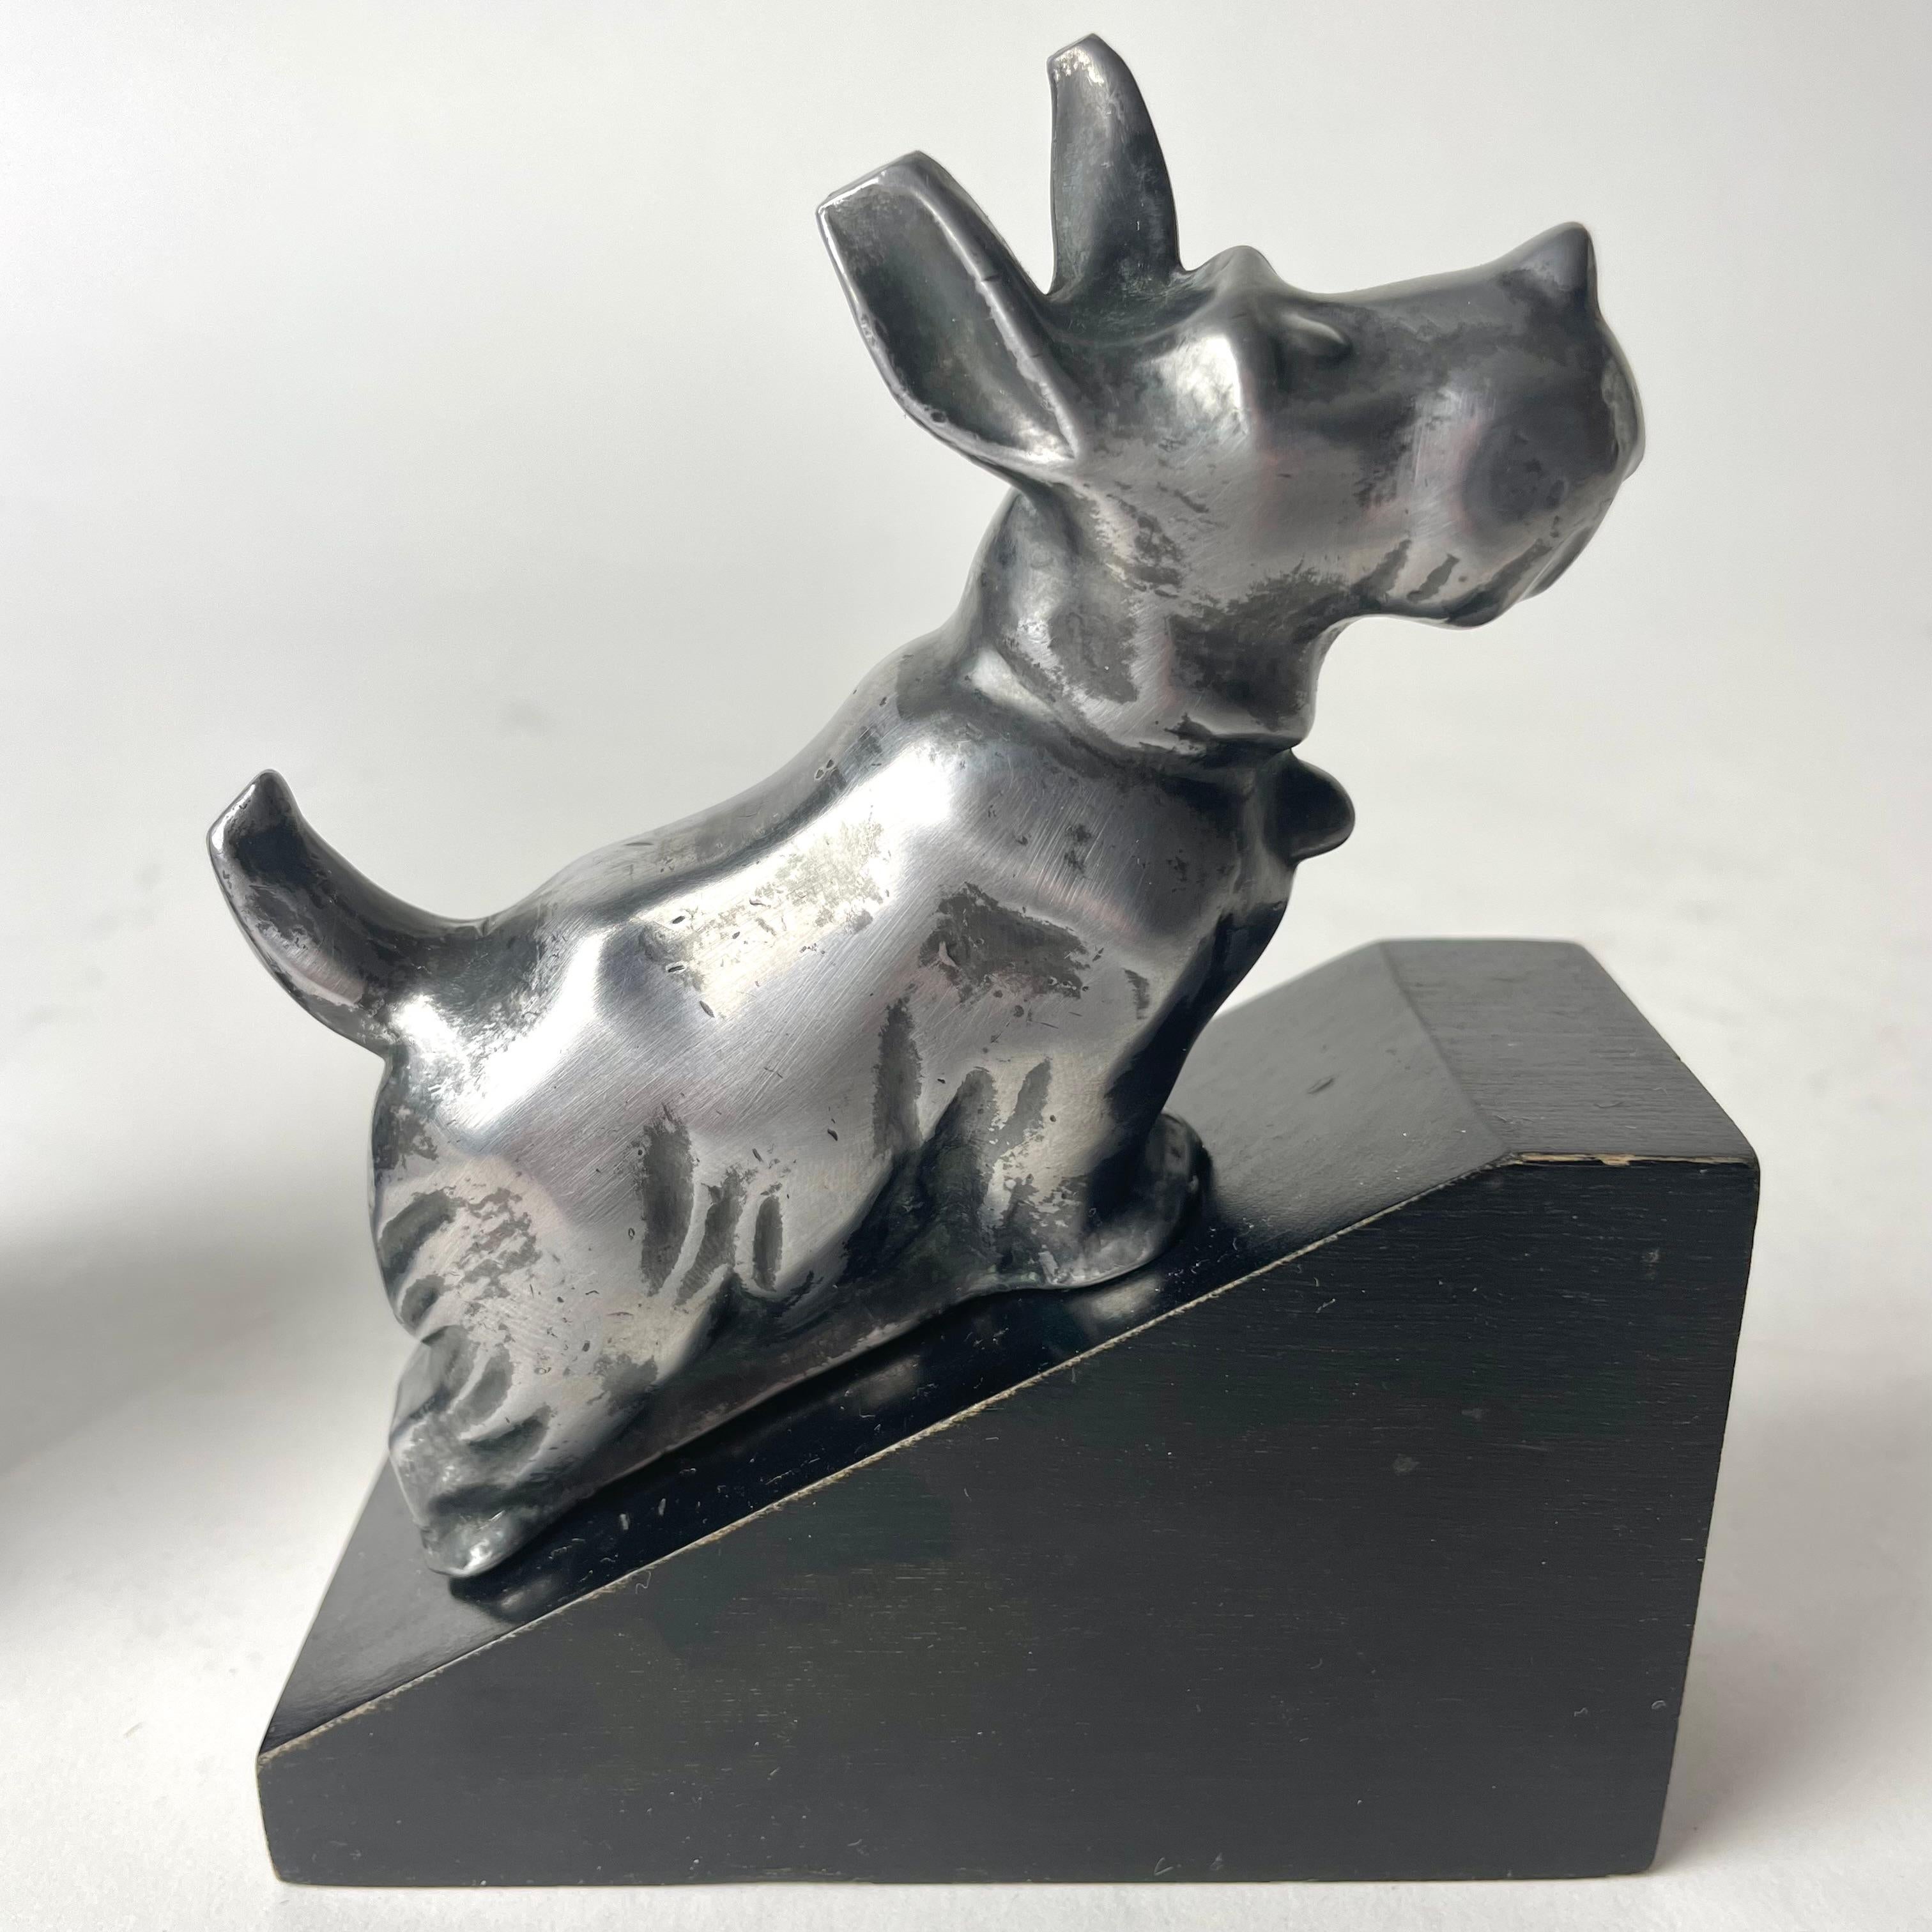 Pewter A charming pair of Art Deco Bookends with a dog and a cat from the 1920s-1930s